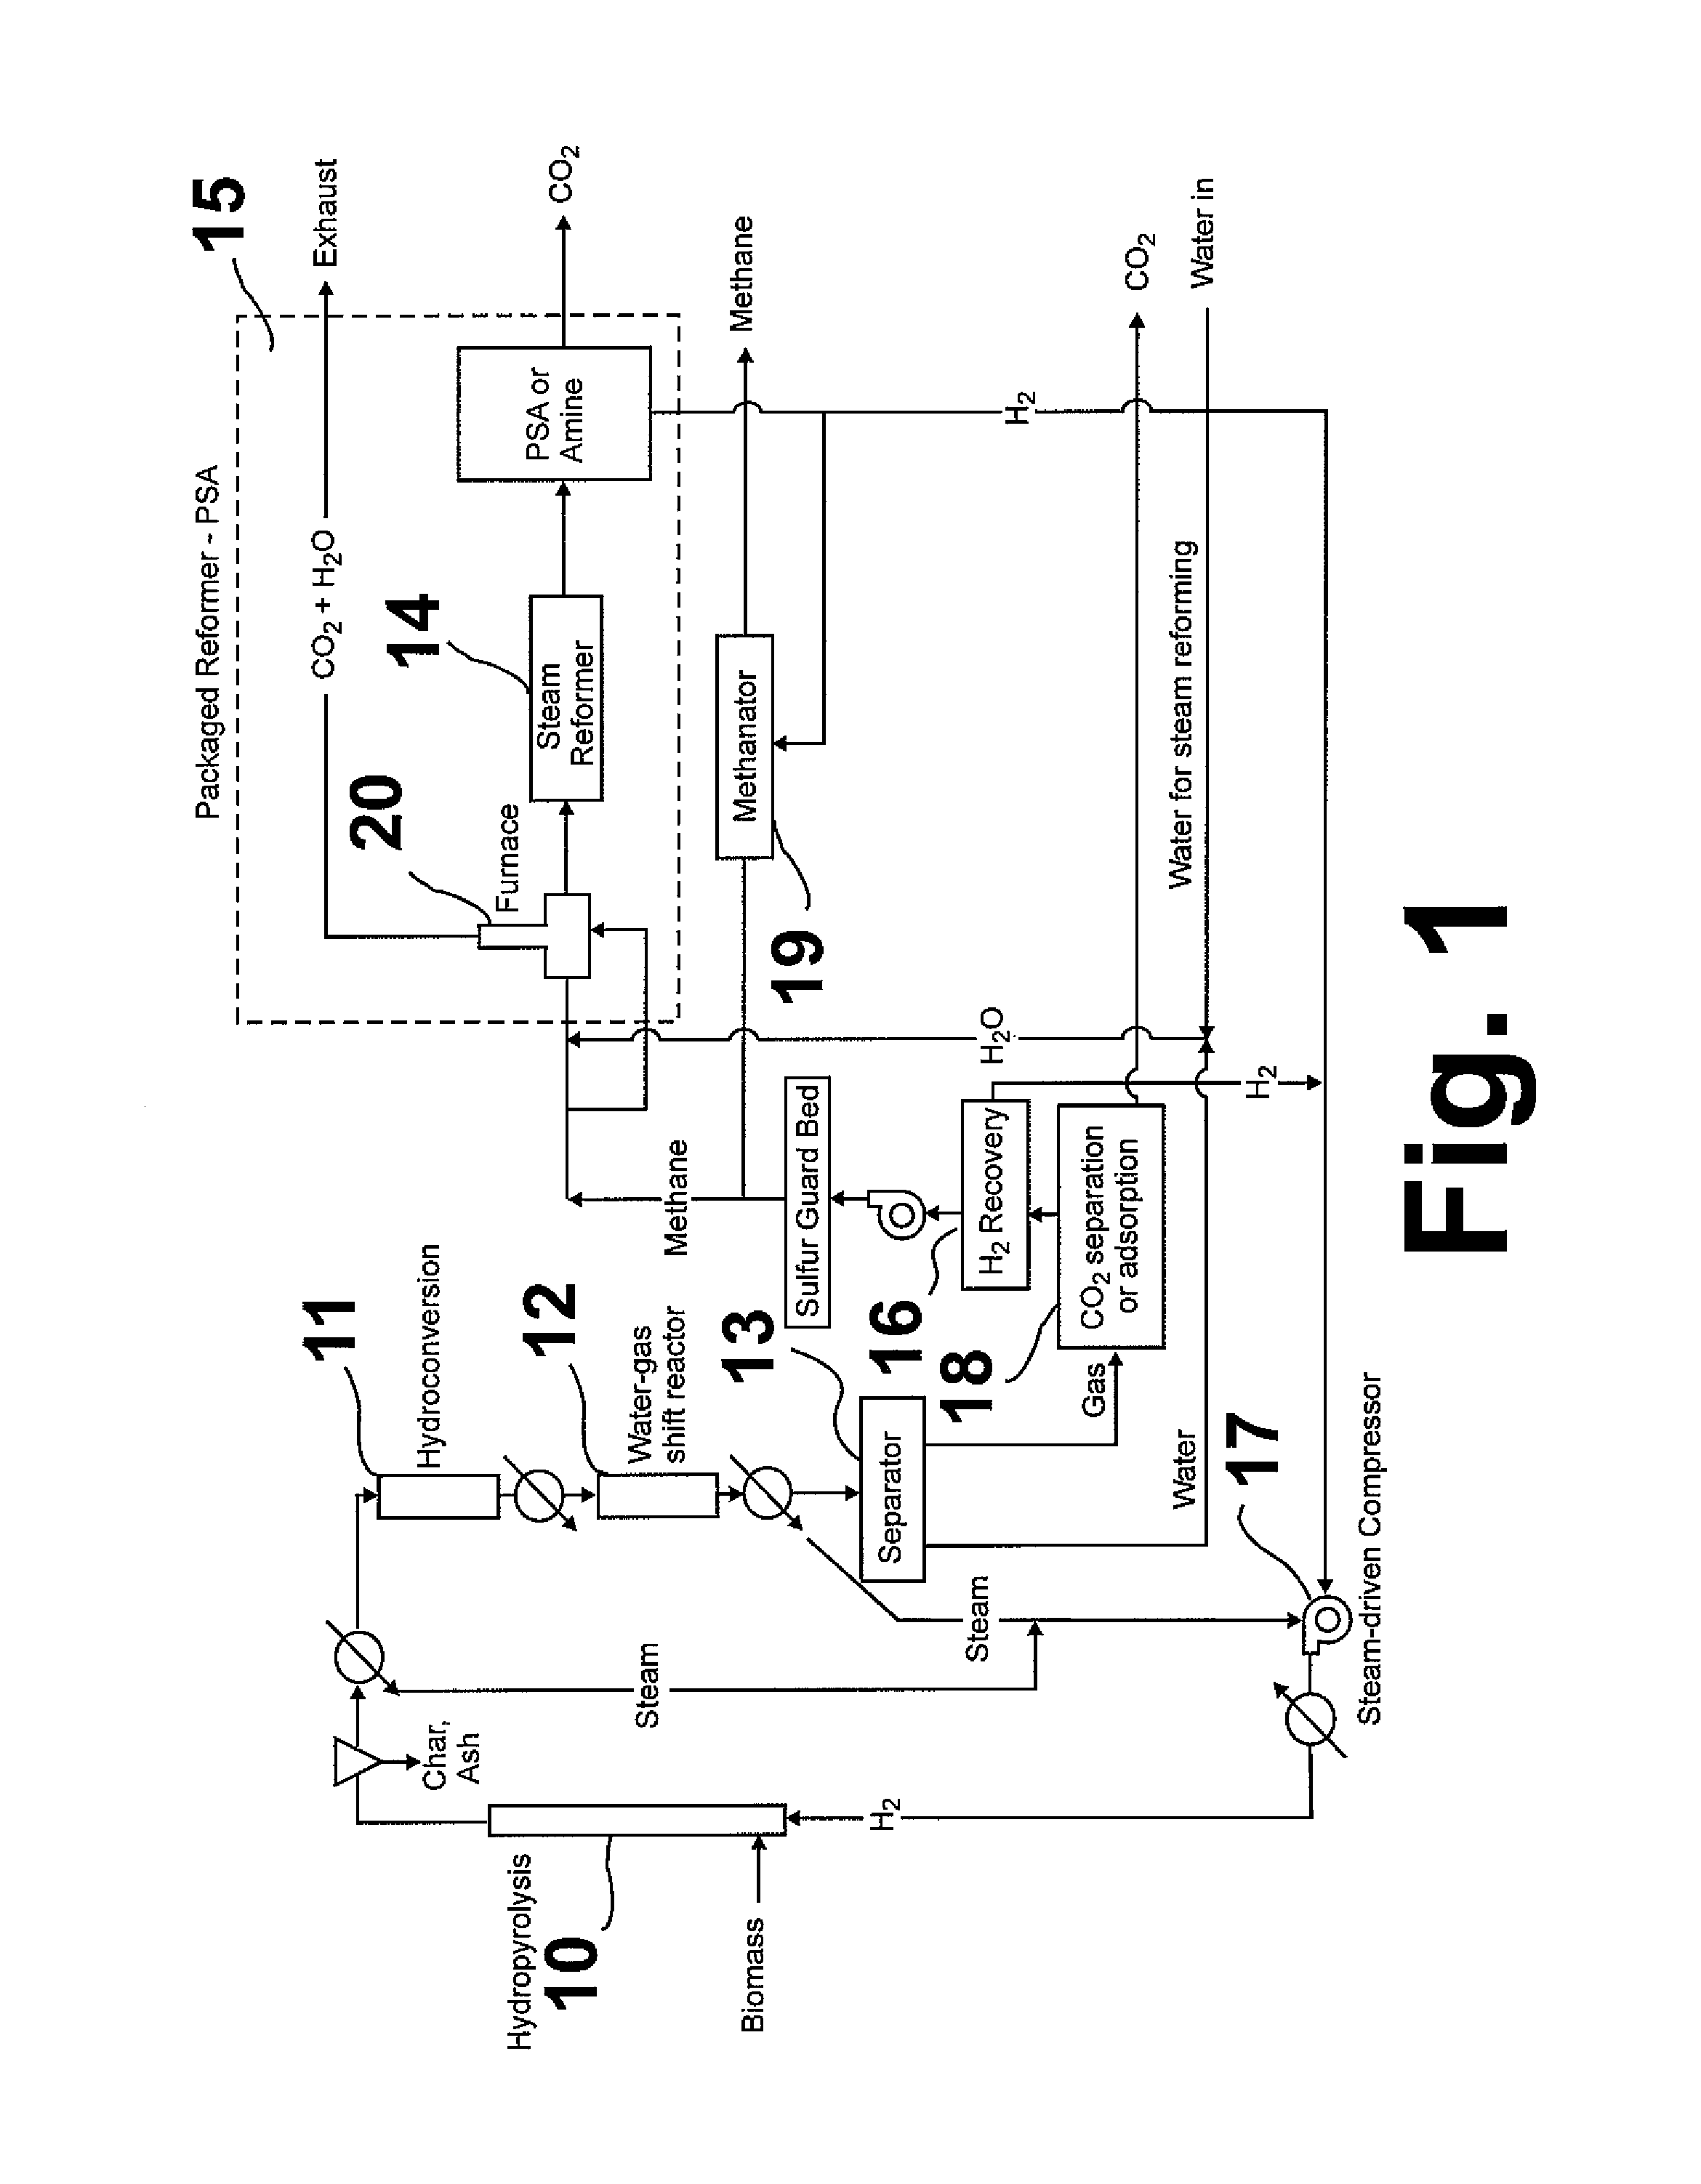 Method for producing methane from biomass